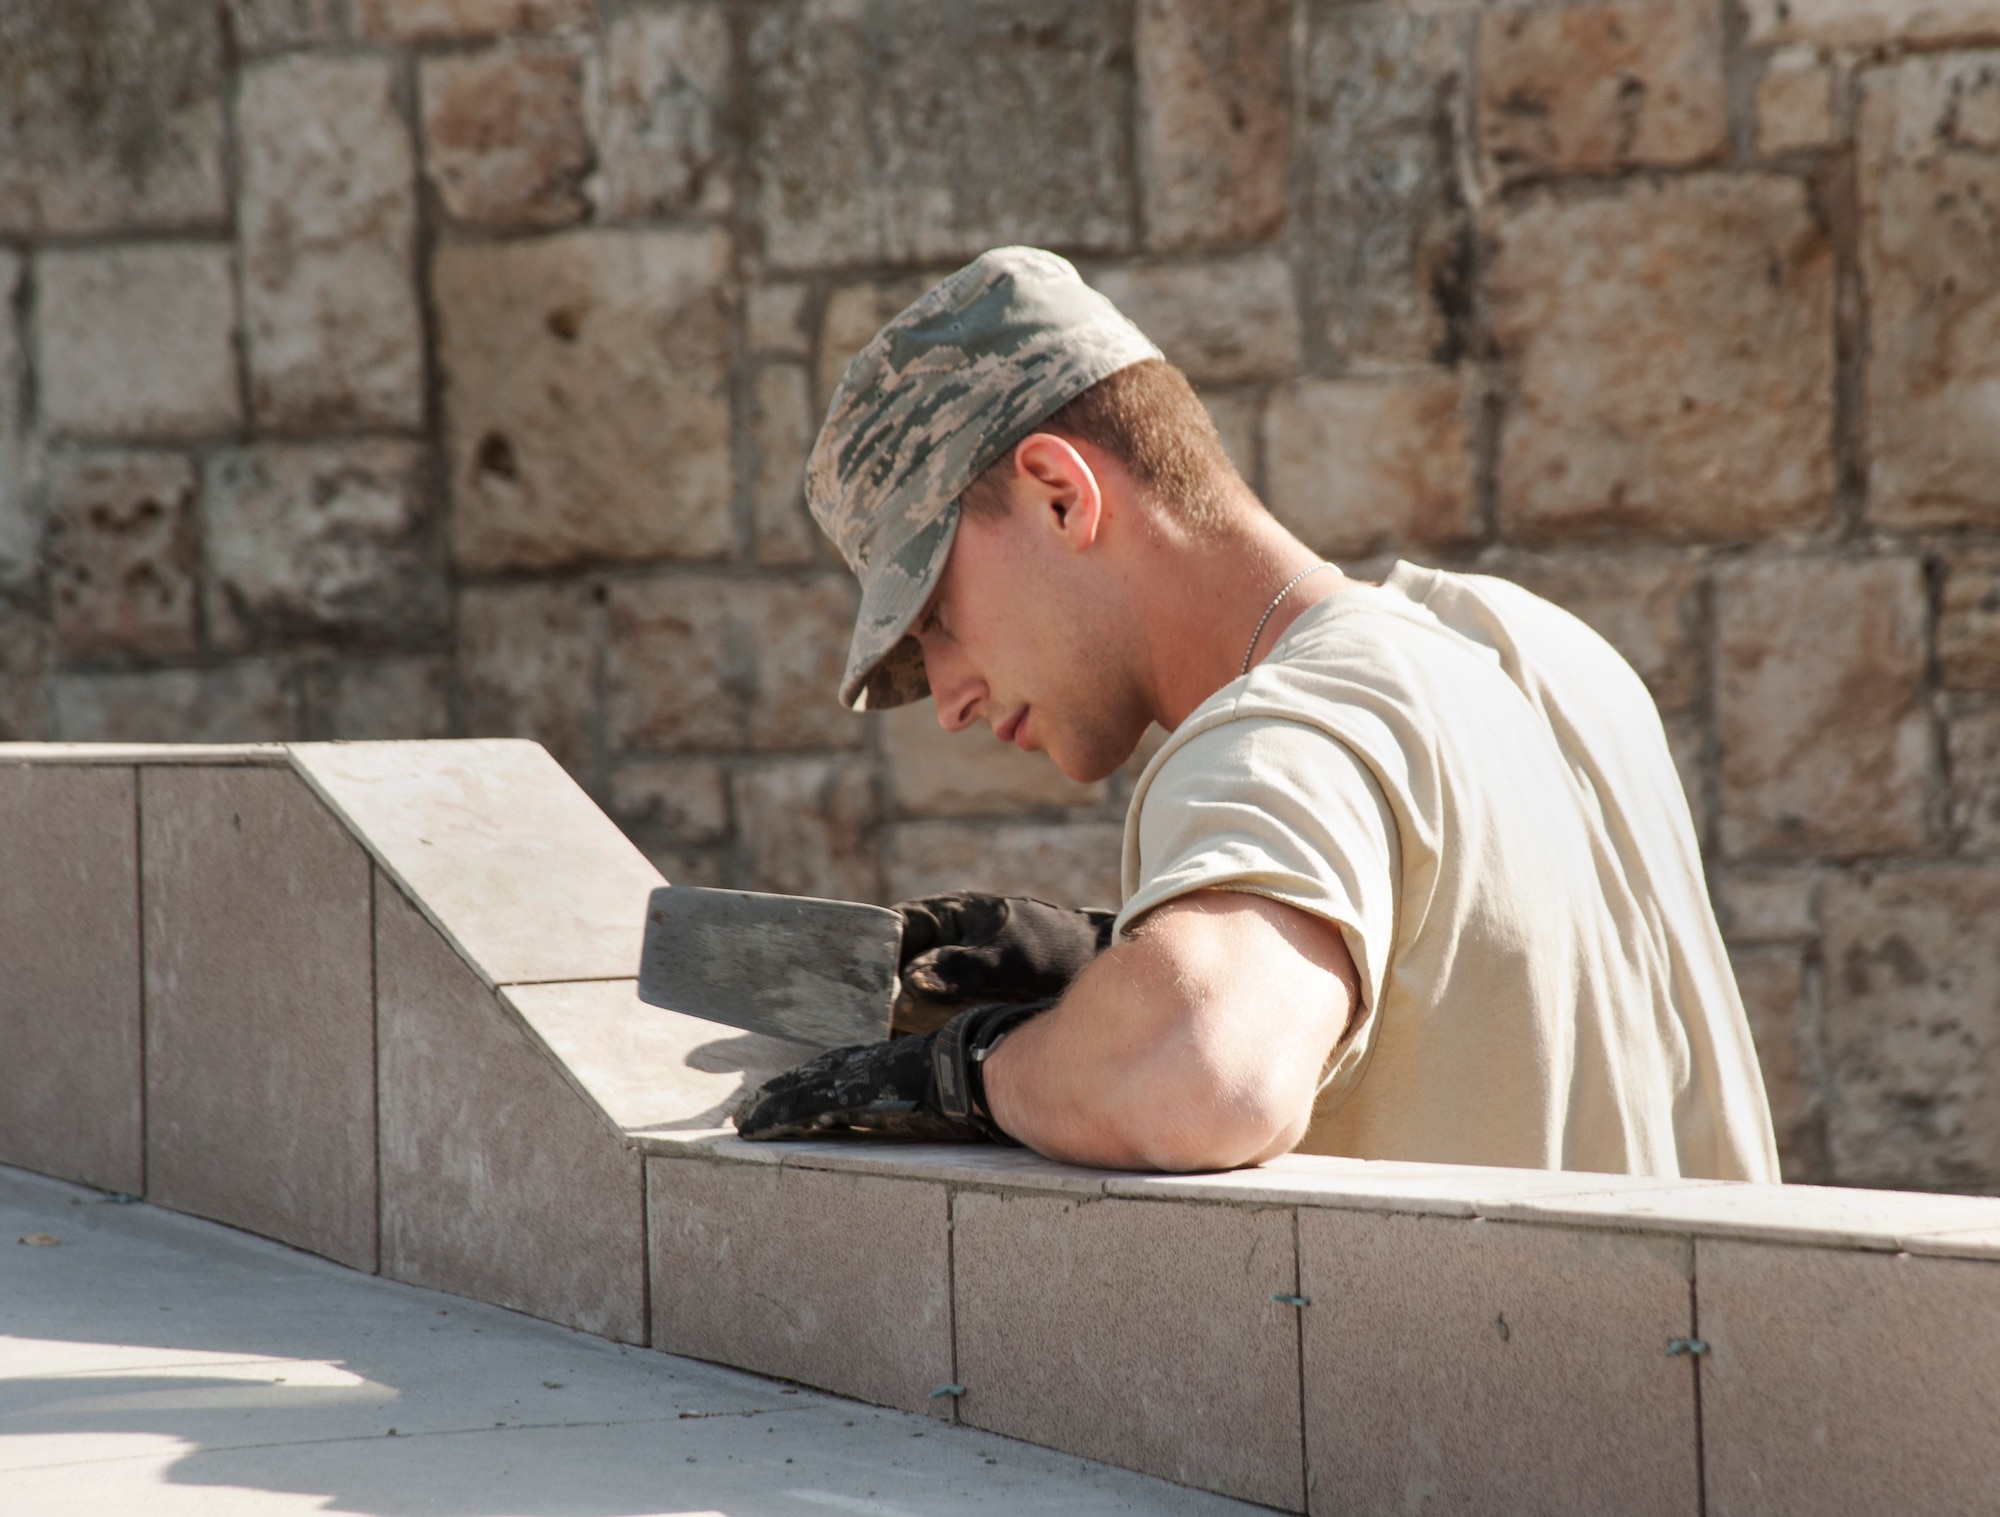 Oregon Air National Guard Airman 1st Class Andrew Altman, assigned to the 142nd Fighter Wing Civil Engineer Squadron, prepares the new tile surface to the wheelchair ramp at the Pavilion C medical facility in the city of Mangalia, Romania, May 19, 2015 as part of the U.S. European Command’s (EUCOM) Humanitarian Civic Assistance Program (HCA). The EUCOM HCA program is designed to improve the host nation's critical infrastructure and the underlying living conditions of the civilian populace. (U.S. Air National Guard photo by Tech. Sgt. John Hughel, 142nd Fighter Wing Public Affairs/Released)